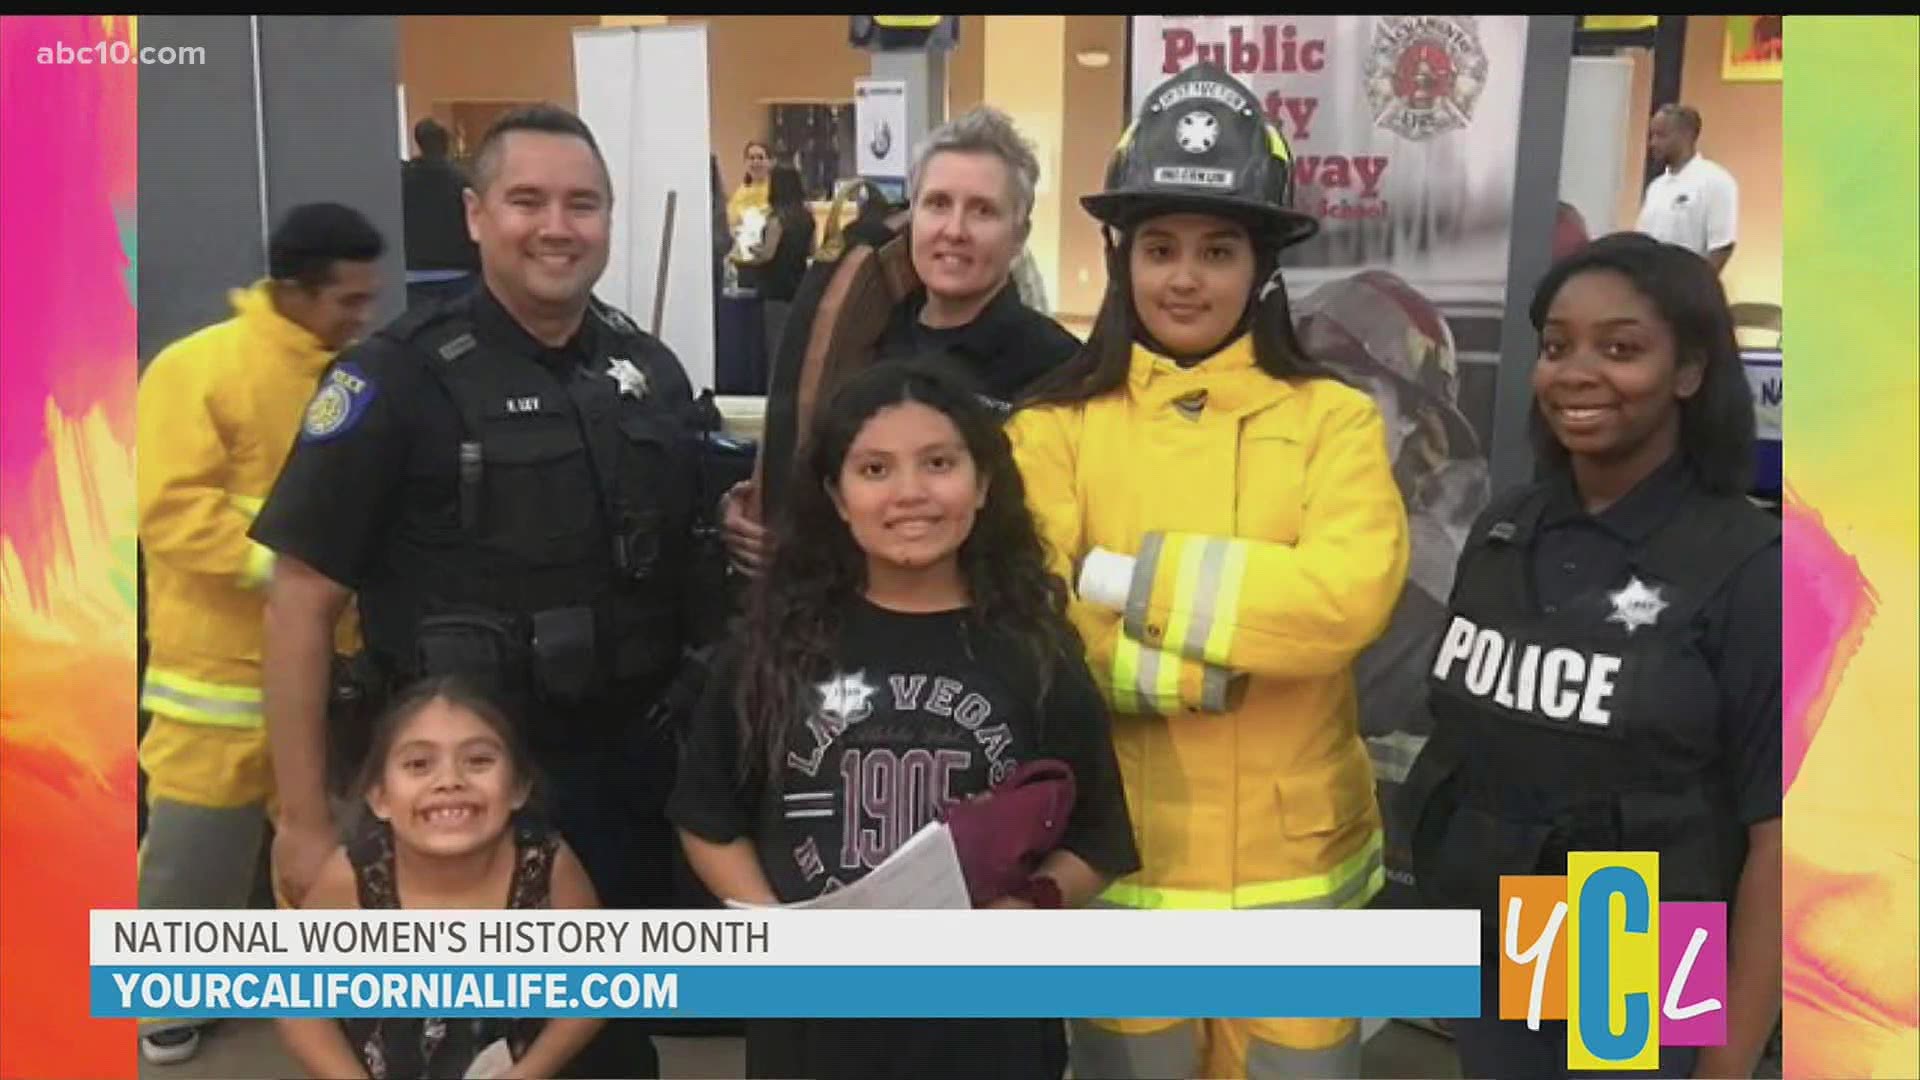 We spotlight a female firefighter who's also teaching Inderkum High school students the technical skills they need to pursue a similar career path in public safety.